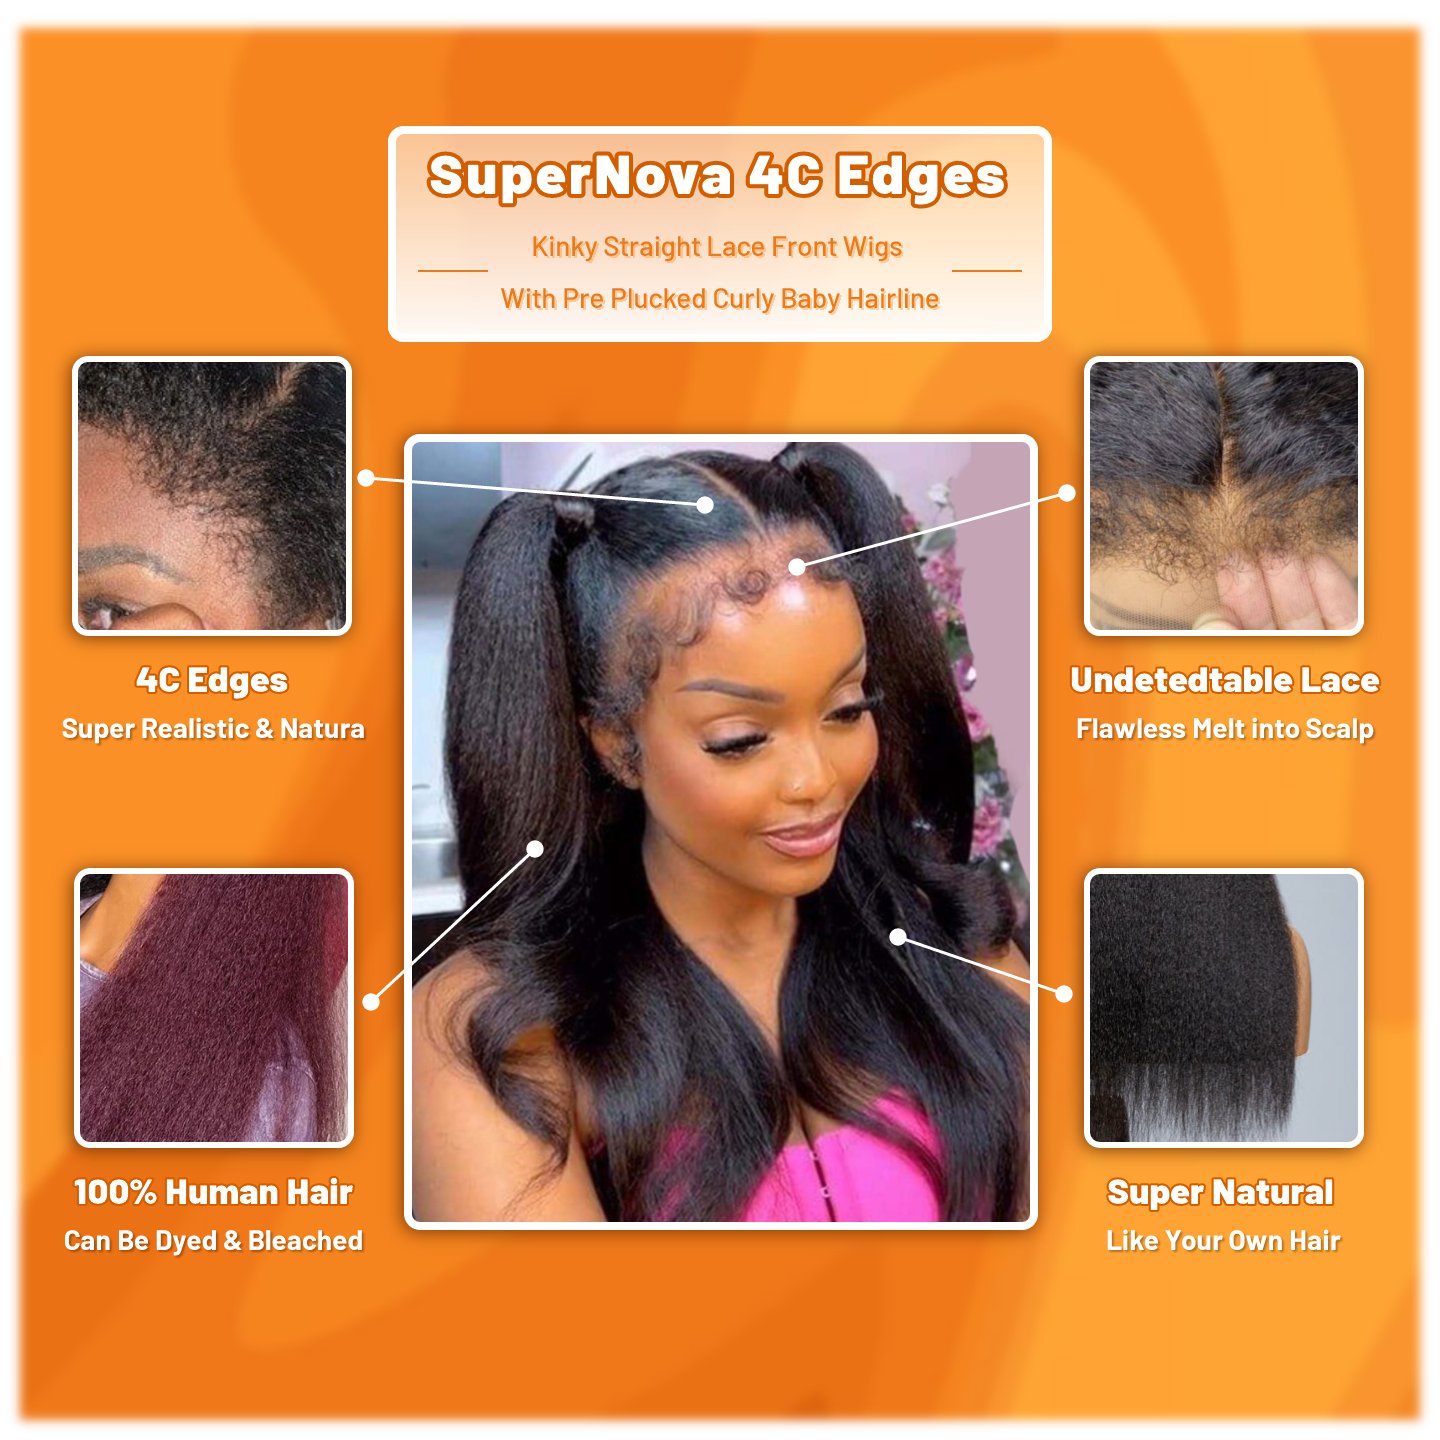 4C Edges Kinky Straight Lace Front Wigs With Pre Plucked Curly Baby Hairline